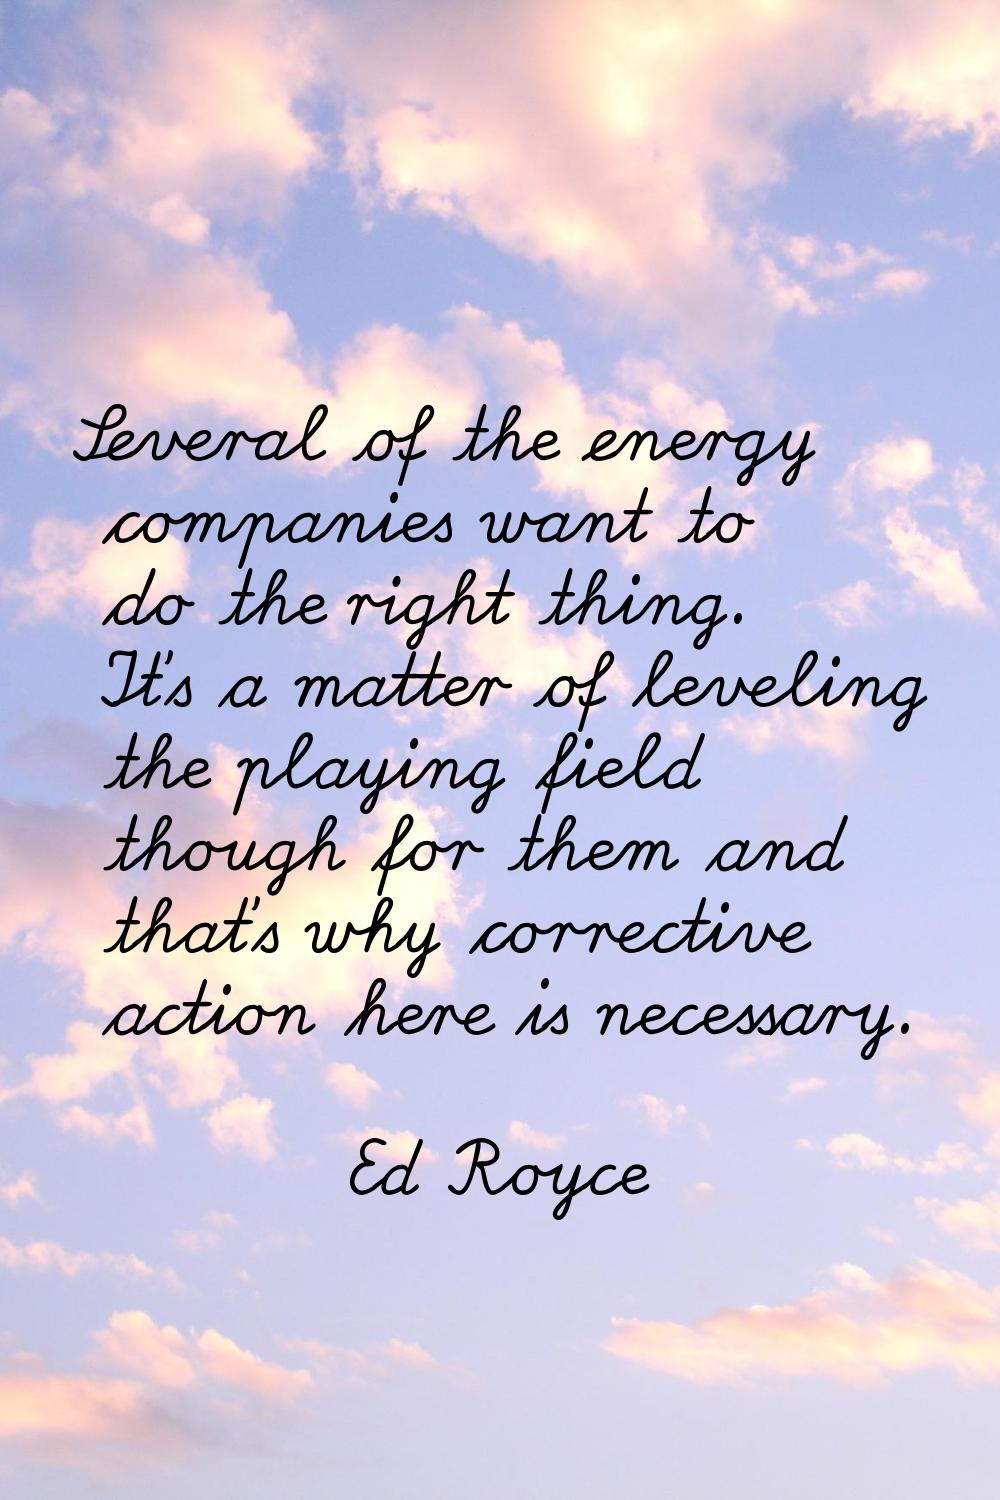 Several of the energy companies want to do the right thing. It's a matter of leveling the playing f